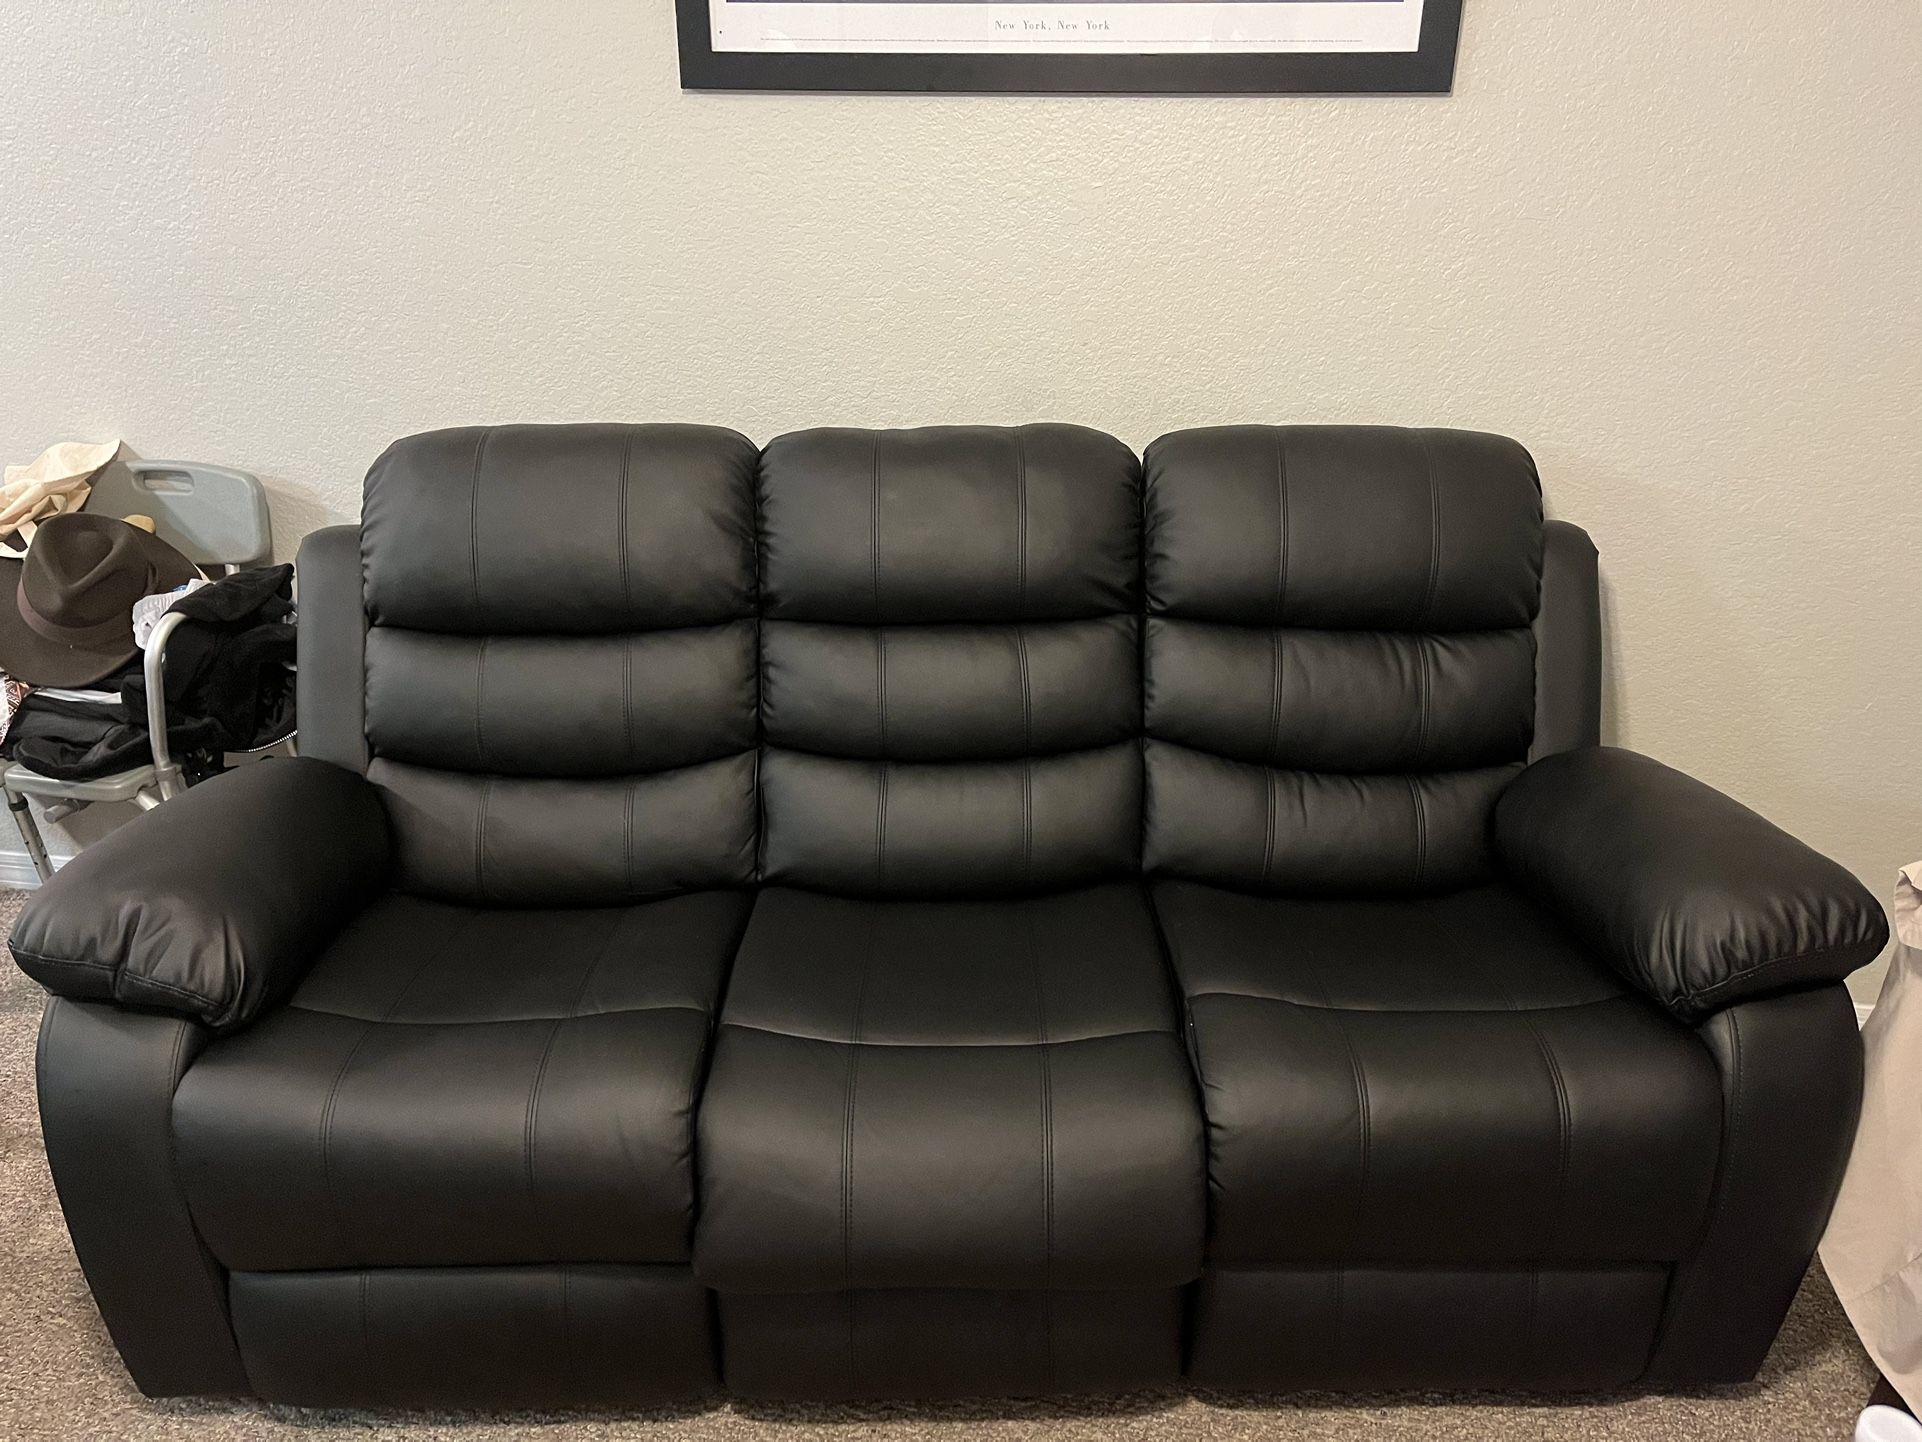 Like-New Black Leather Look Couch/Sofa with Reclining Seats!